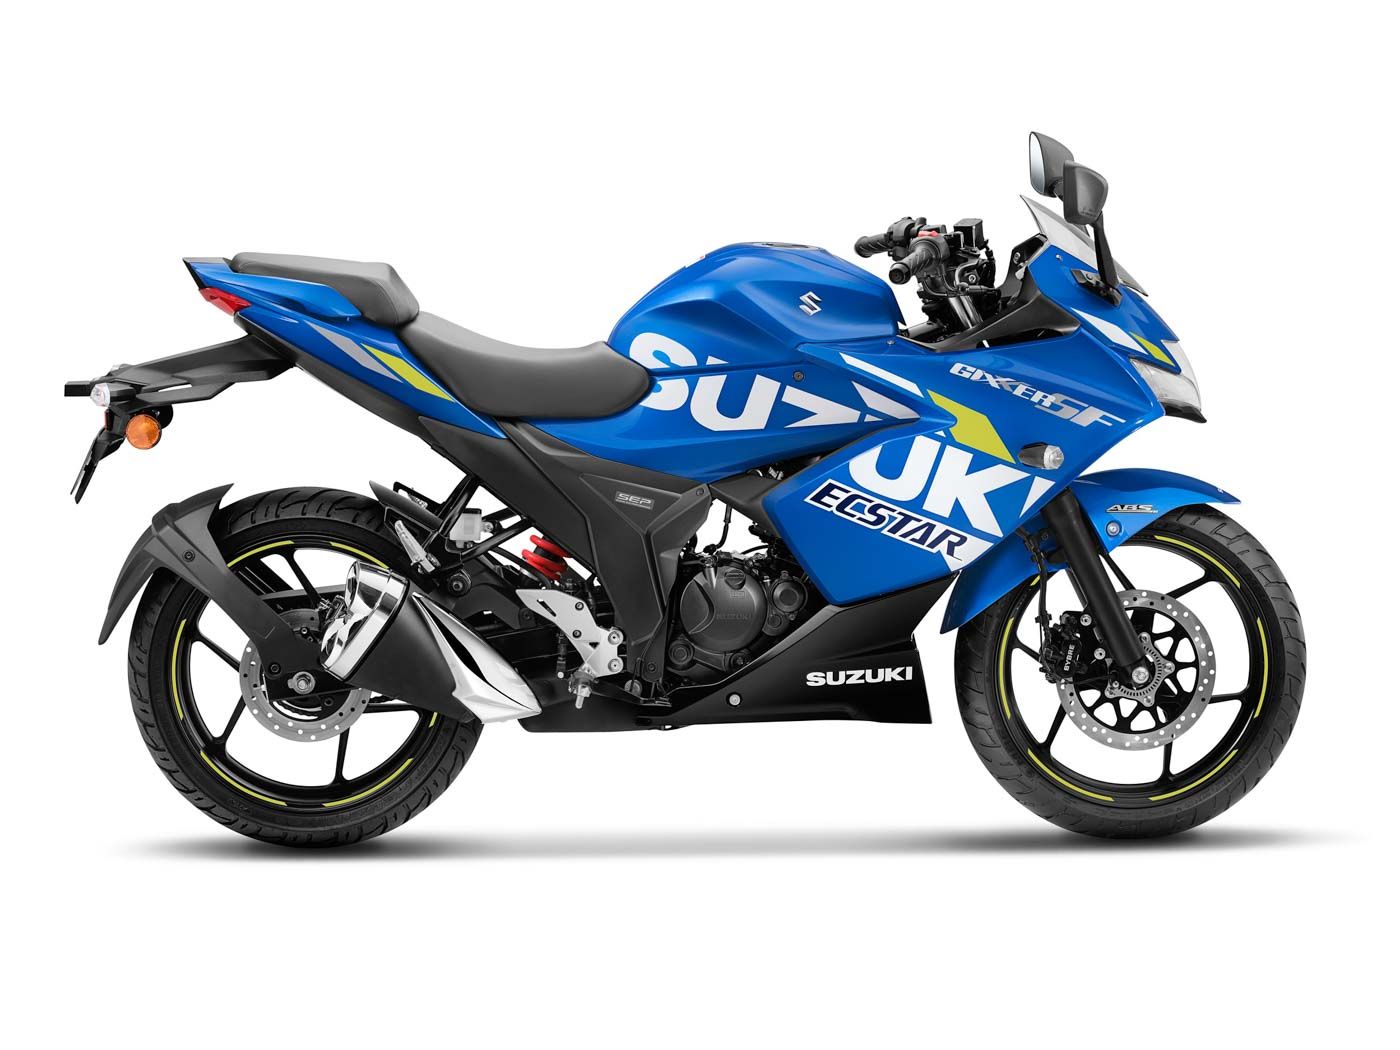 BS6 Suzuki Gixxer and Gixxer SF Launched From Rs 1.12 Lakh